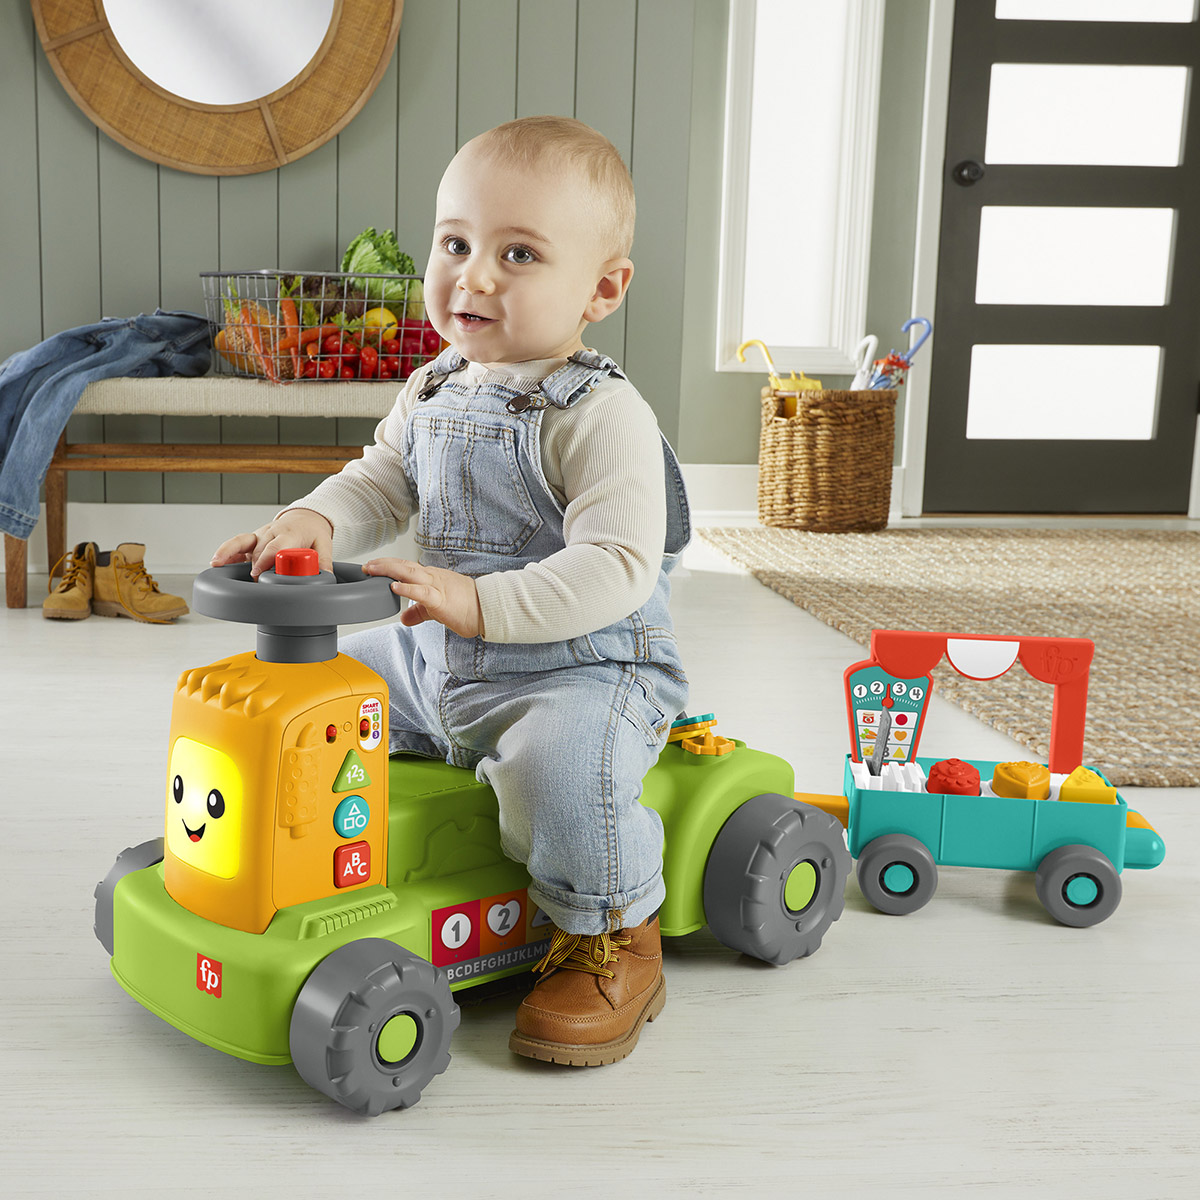 Fisher-Price(R) Laugh & Learn(tm) 4-in-1 Farm To Market Tractor